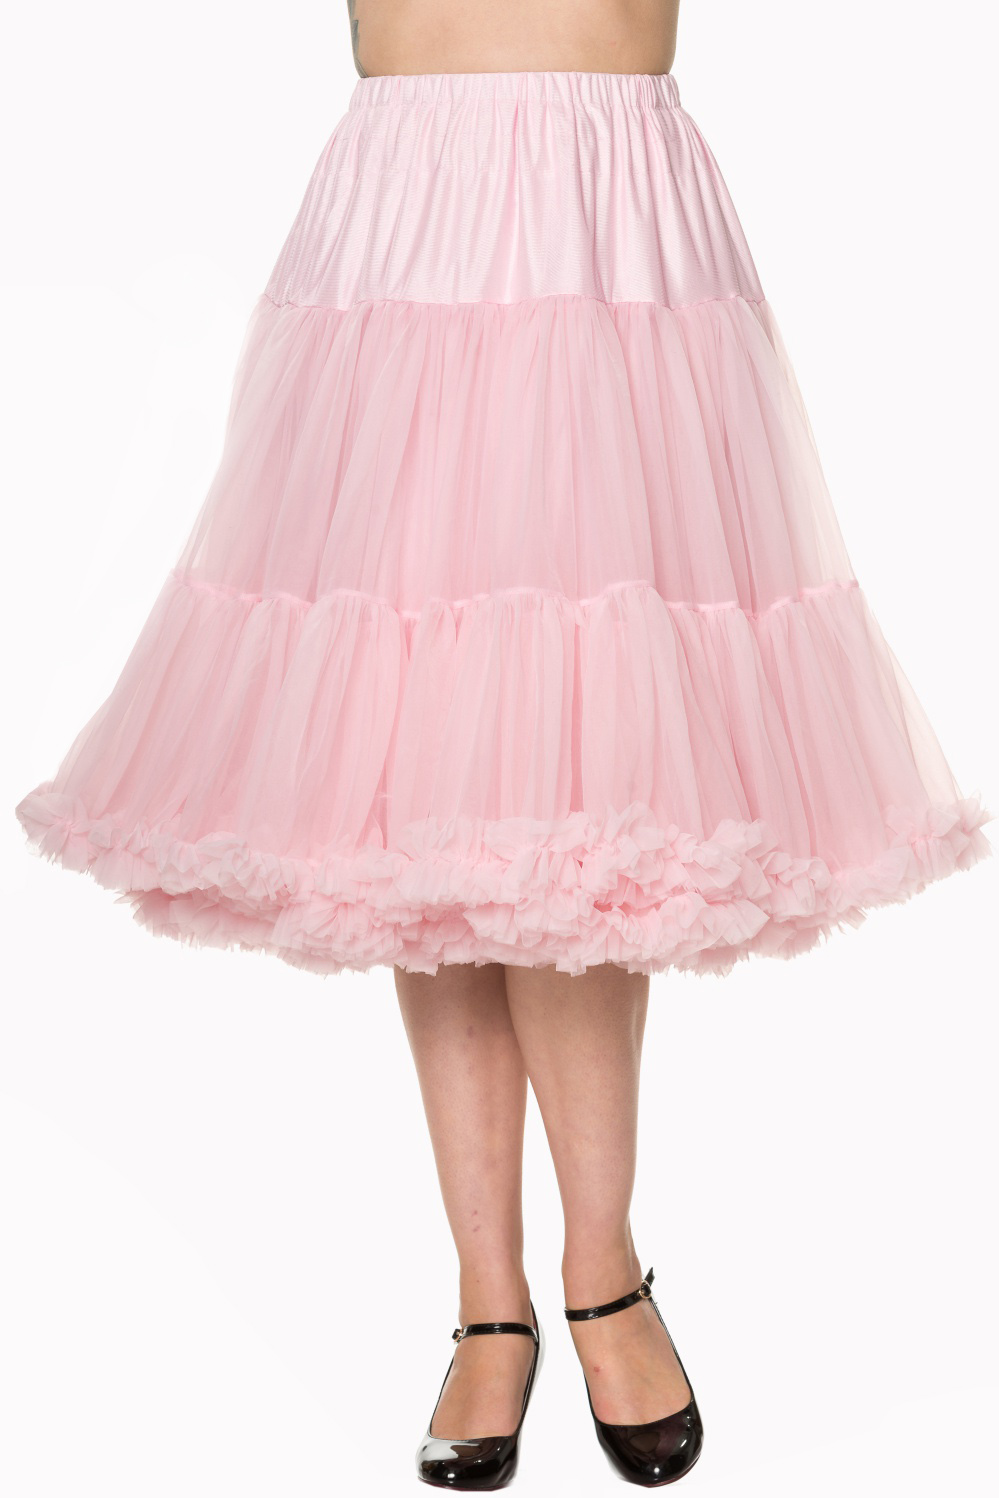 Banned Retro 50s Lizzy Lifeforms Light Pink Petticoat